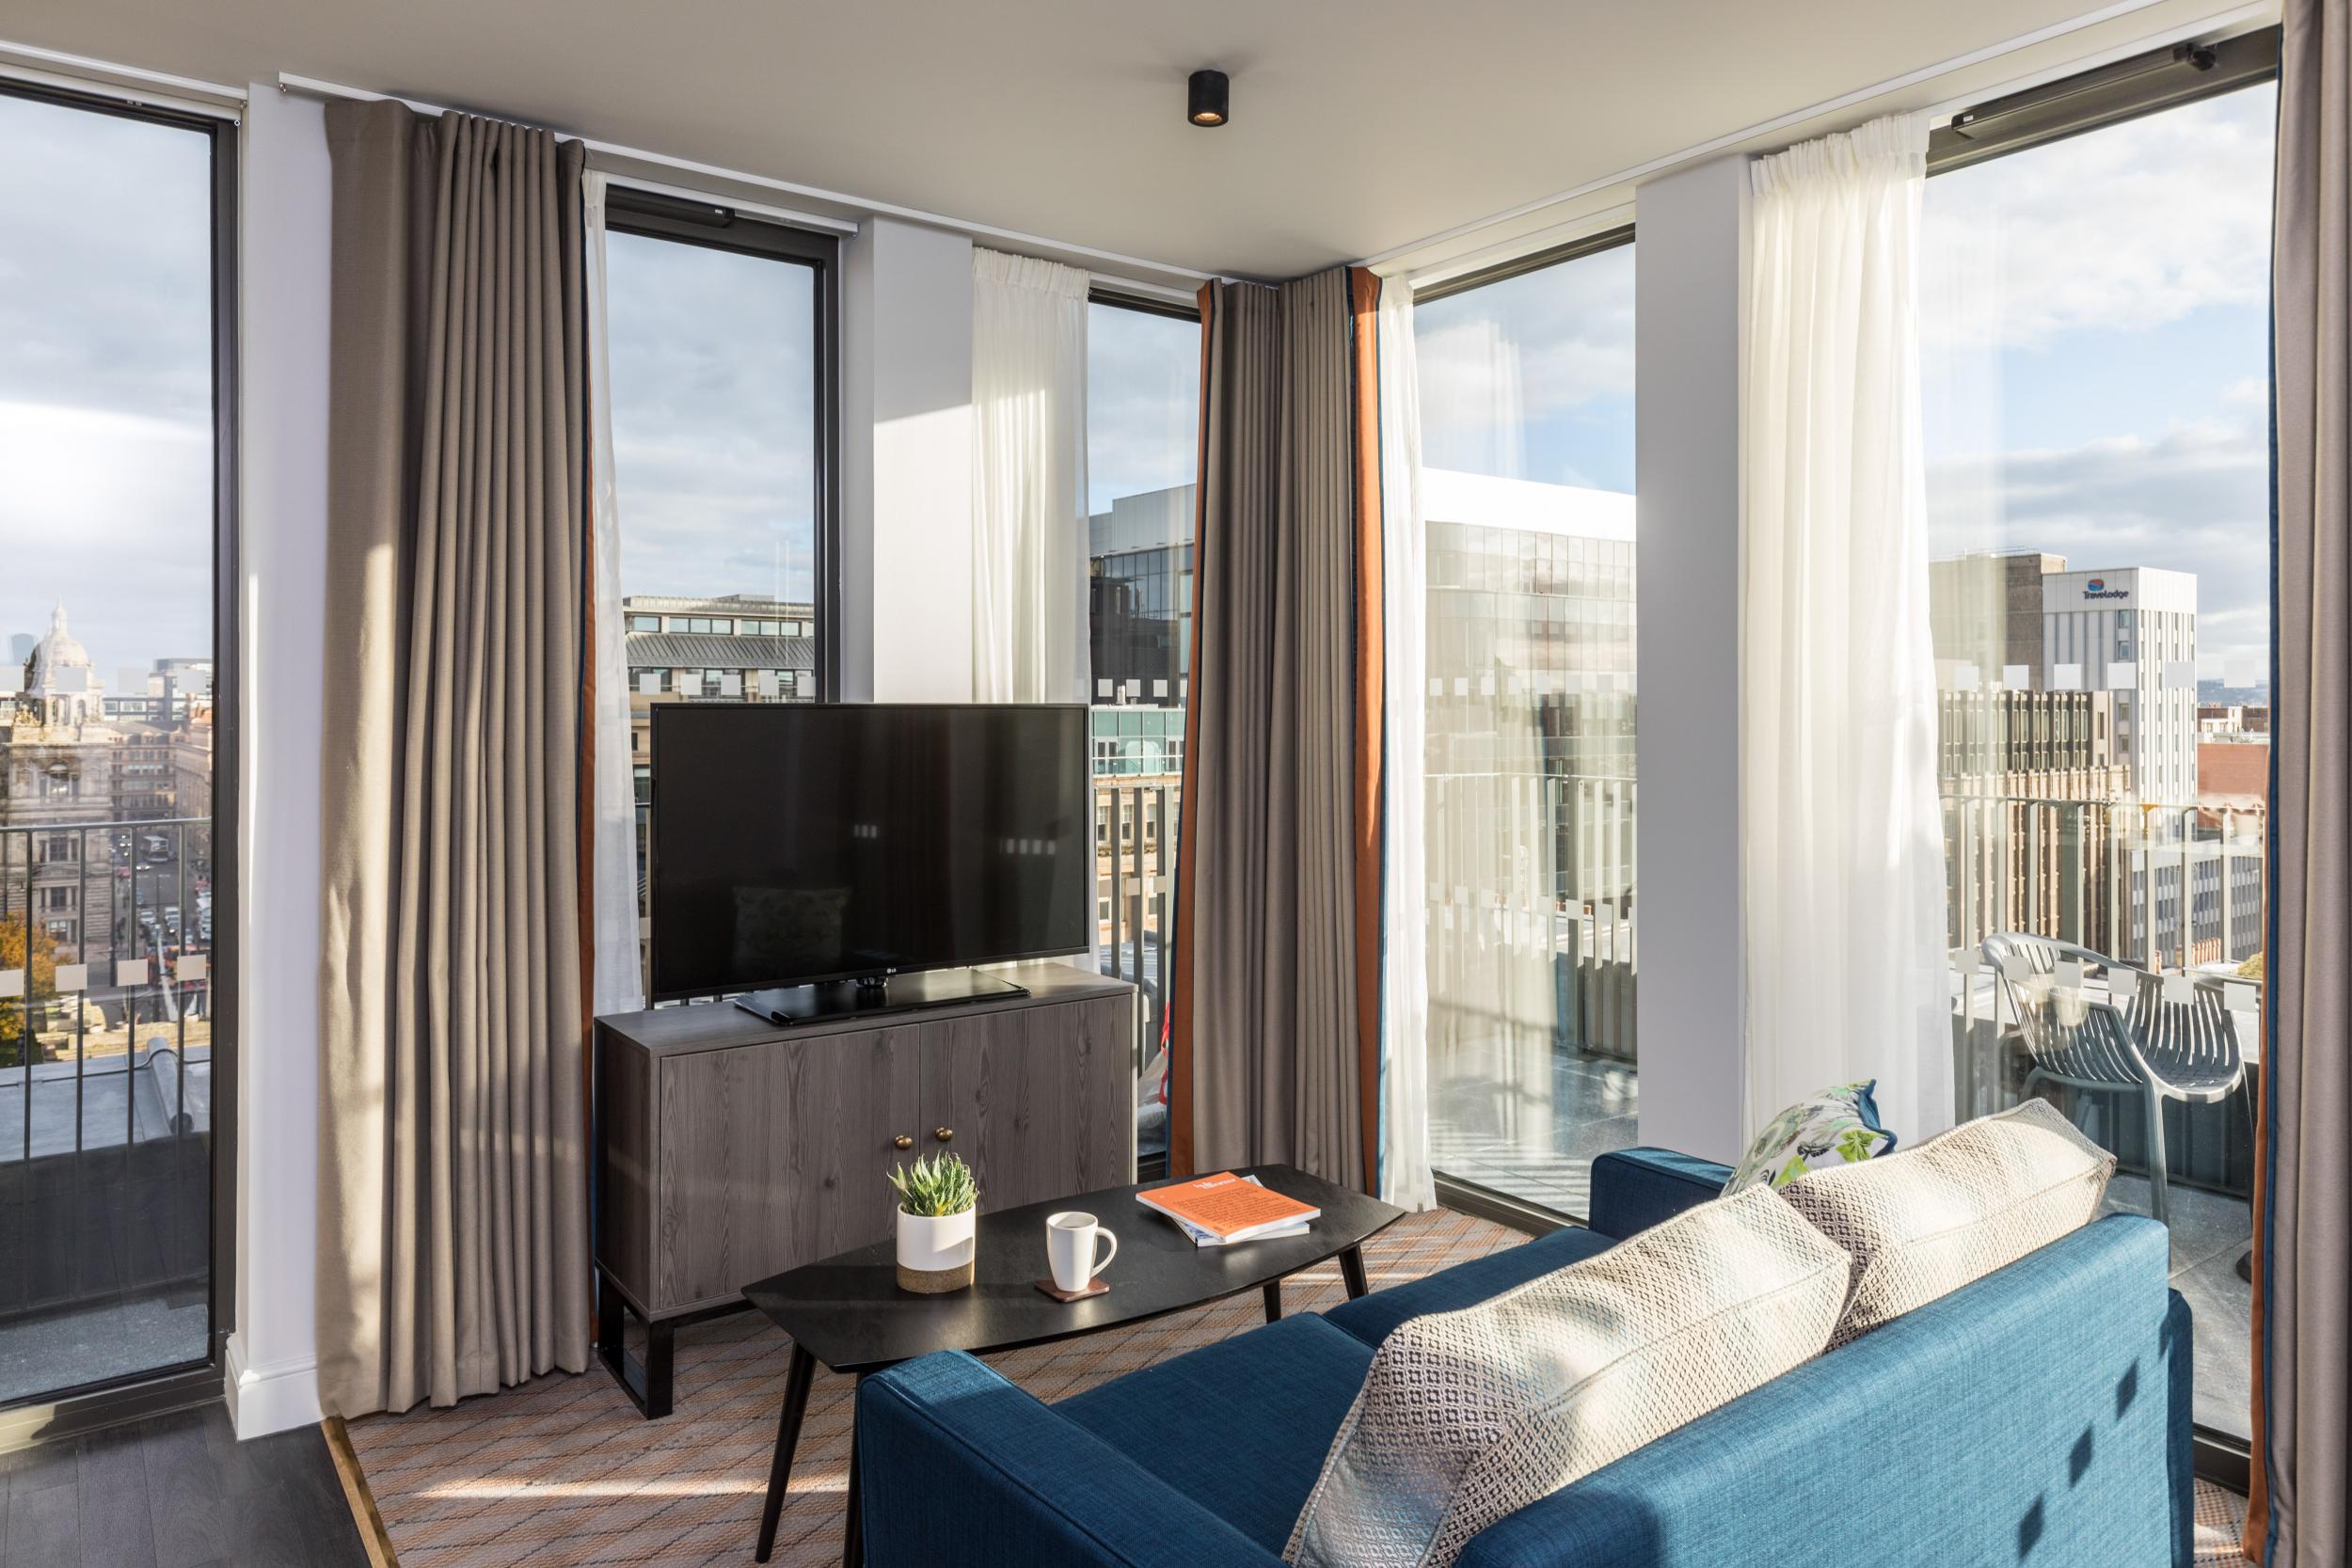 The Penthouse at Native Glasgow offers exceptional city views